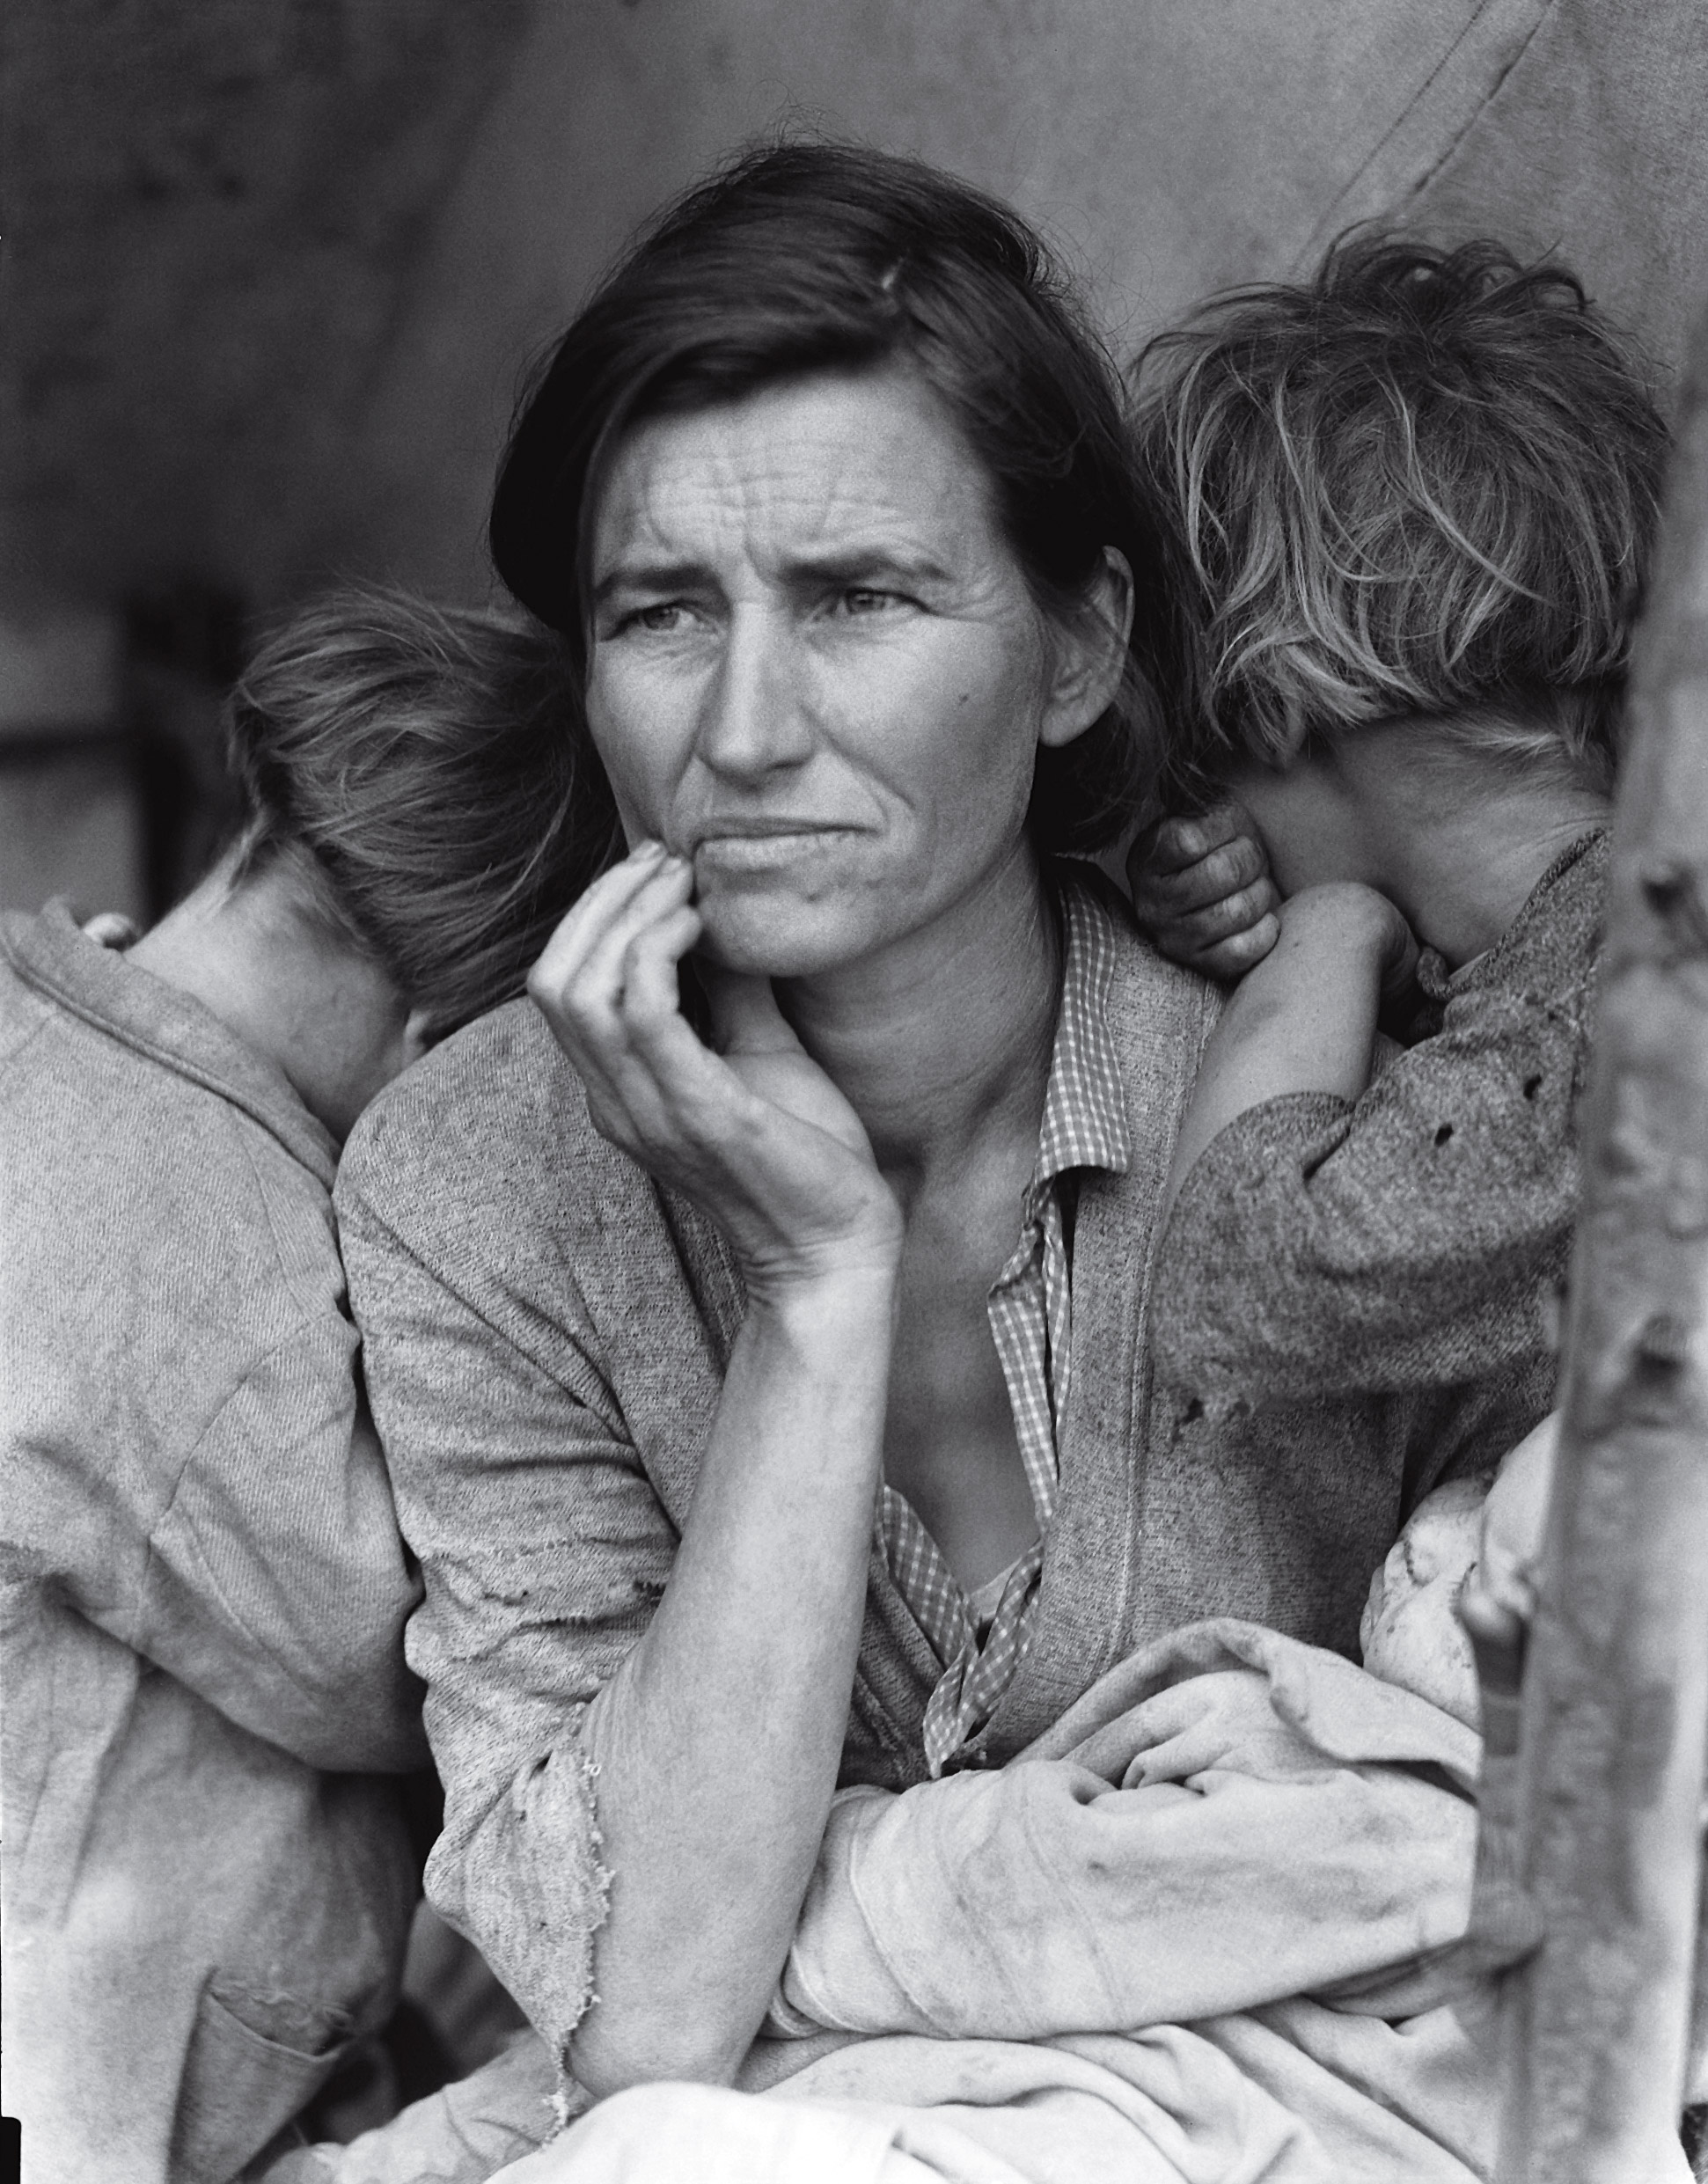 Florence Thompson with three of her children in a photograph known as "Migrant Mother." 1936.